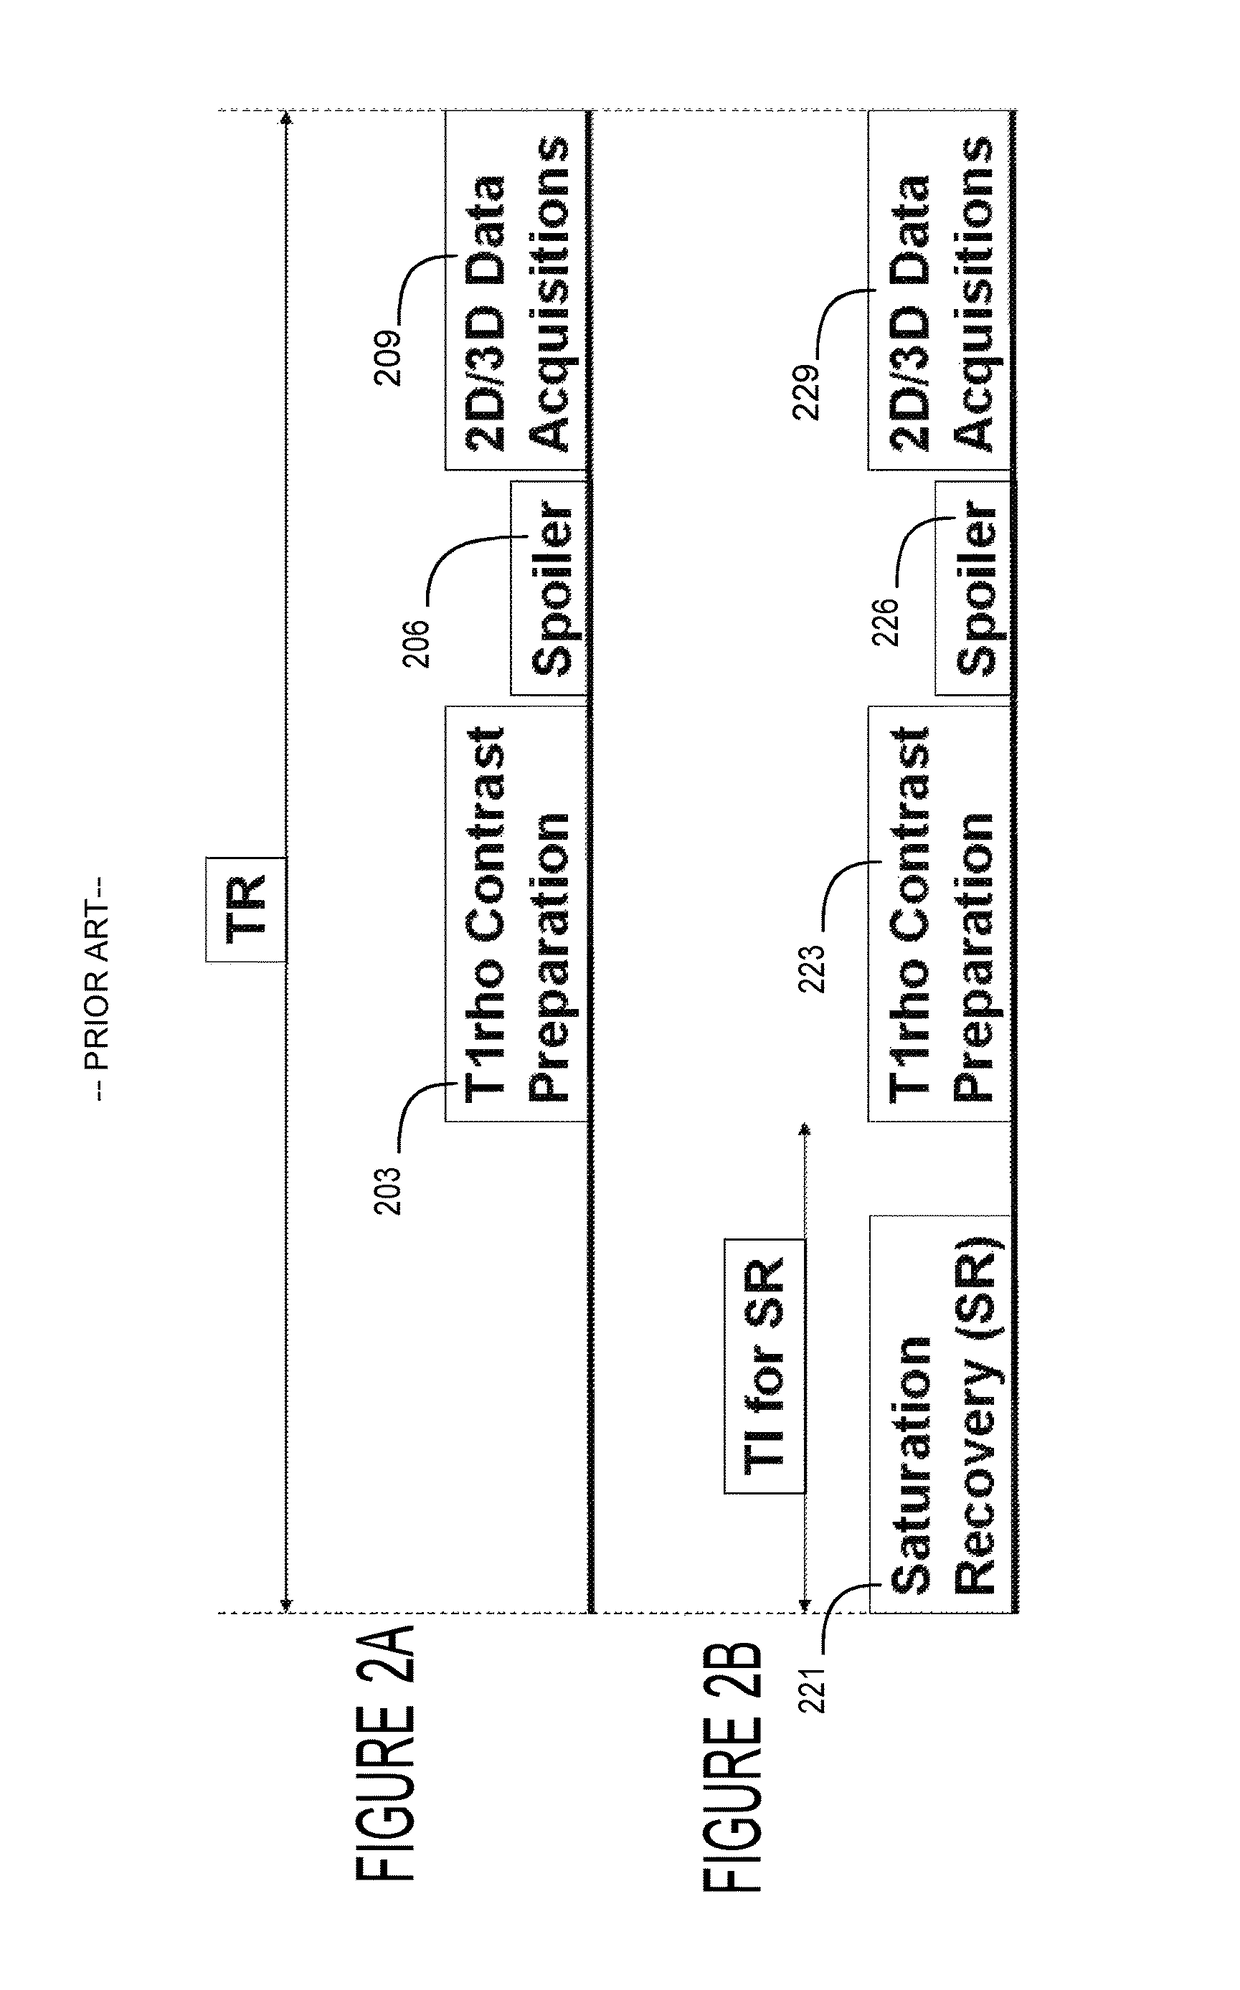 System for reducing artifacts in imaging in the presence of a spin-lock radio-frequency field